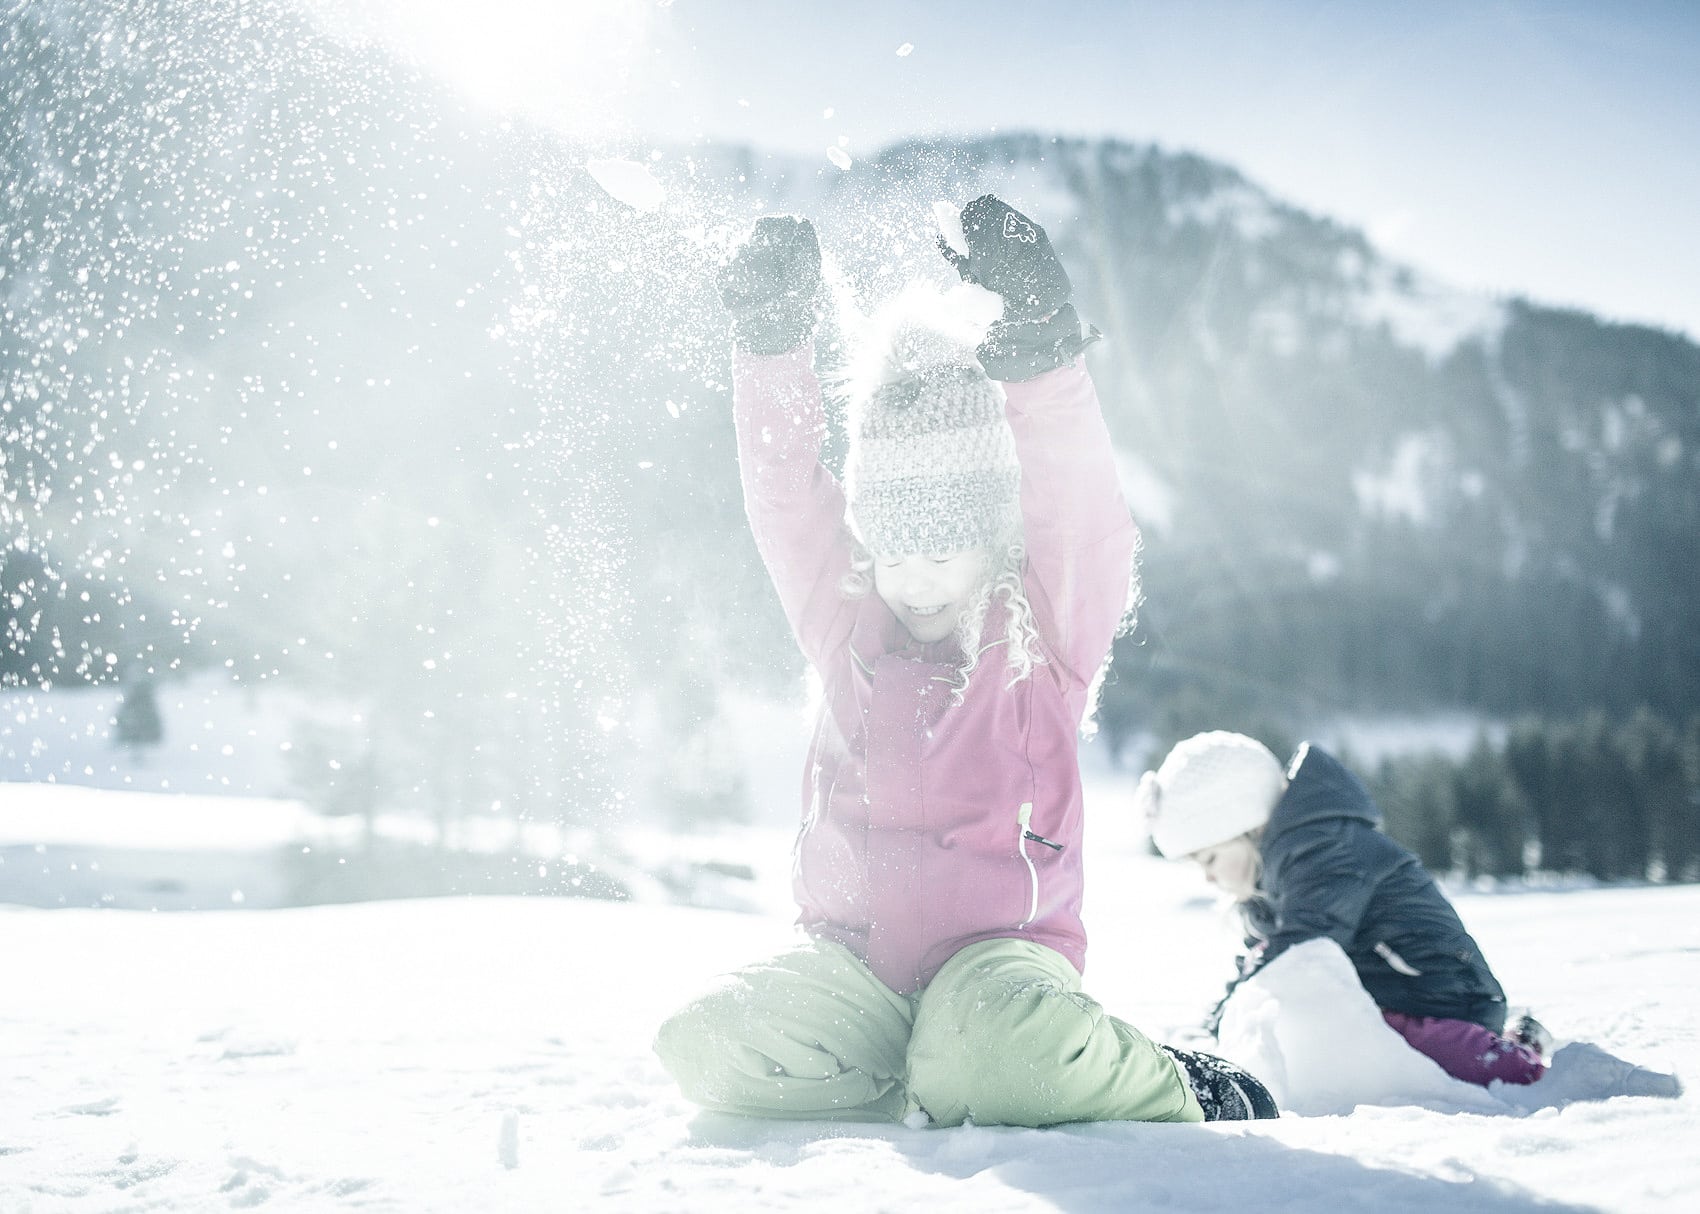 A joyful child playing with snow, tossing it up into the air on a sunny winter day while another child is seen building something with snow in the background.